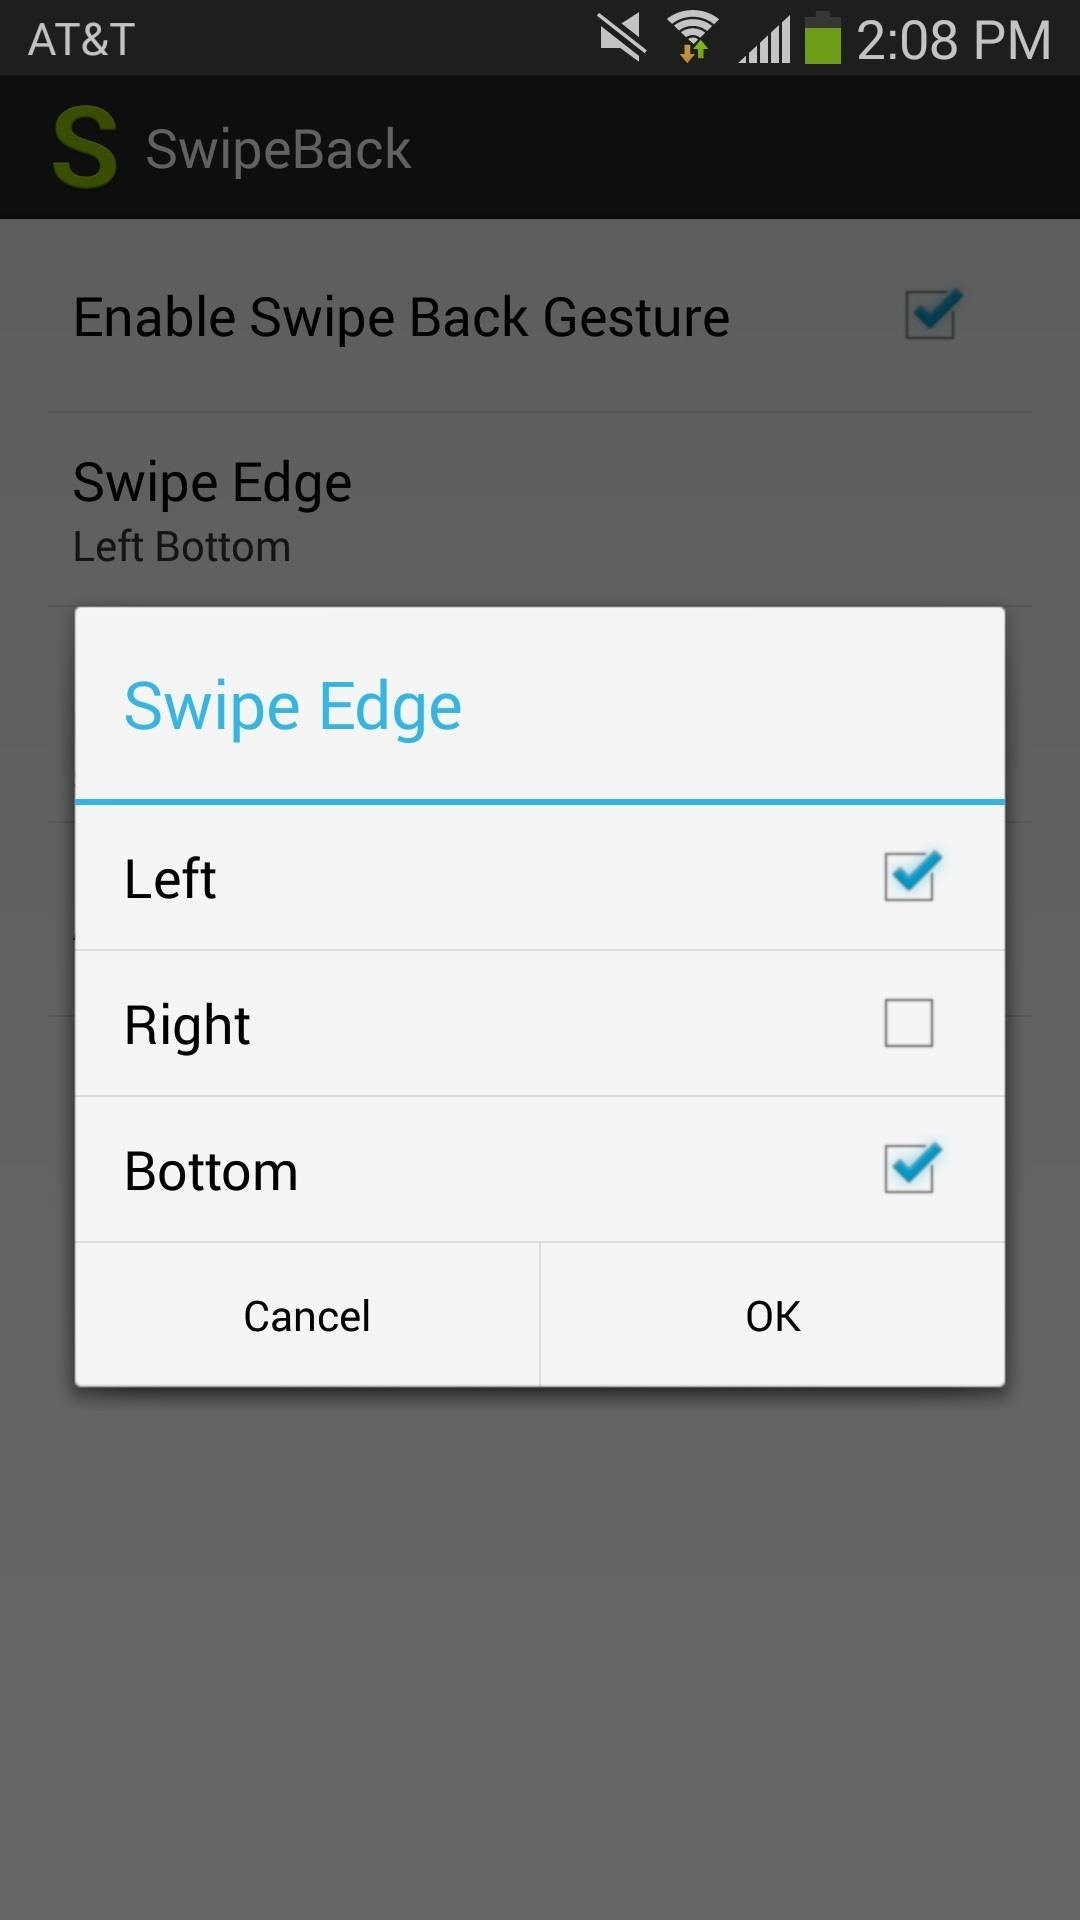 How to Enable the Swipe-Back Gesture for All Apps on the Galaxy Note 2 & 3